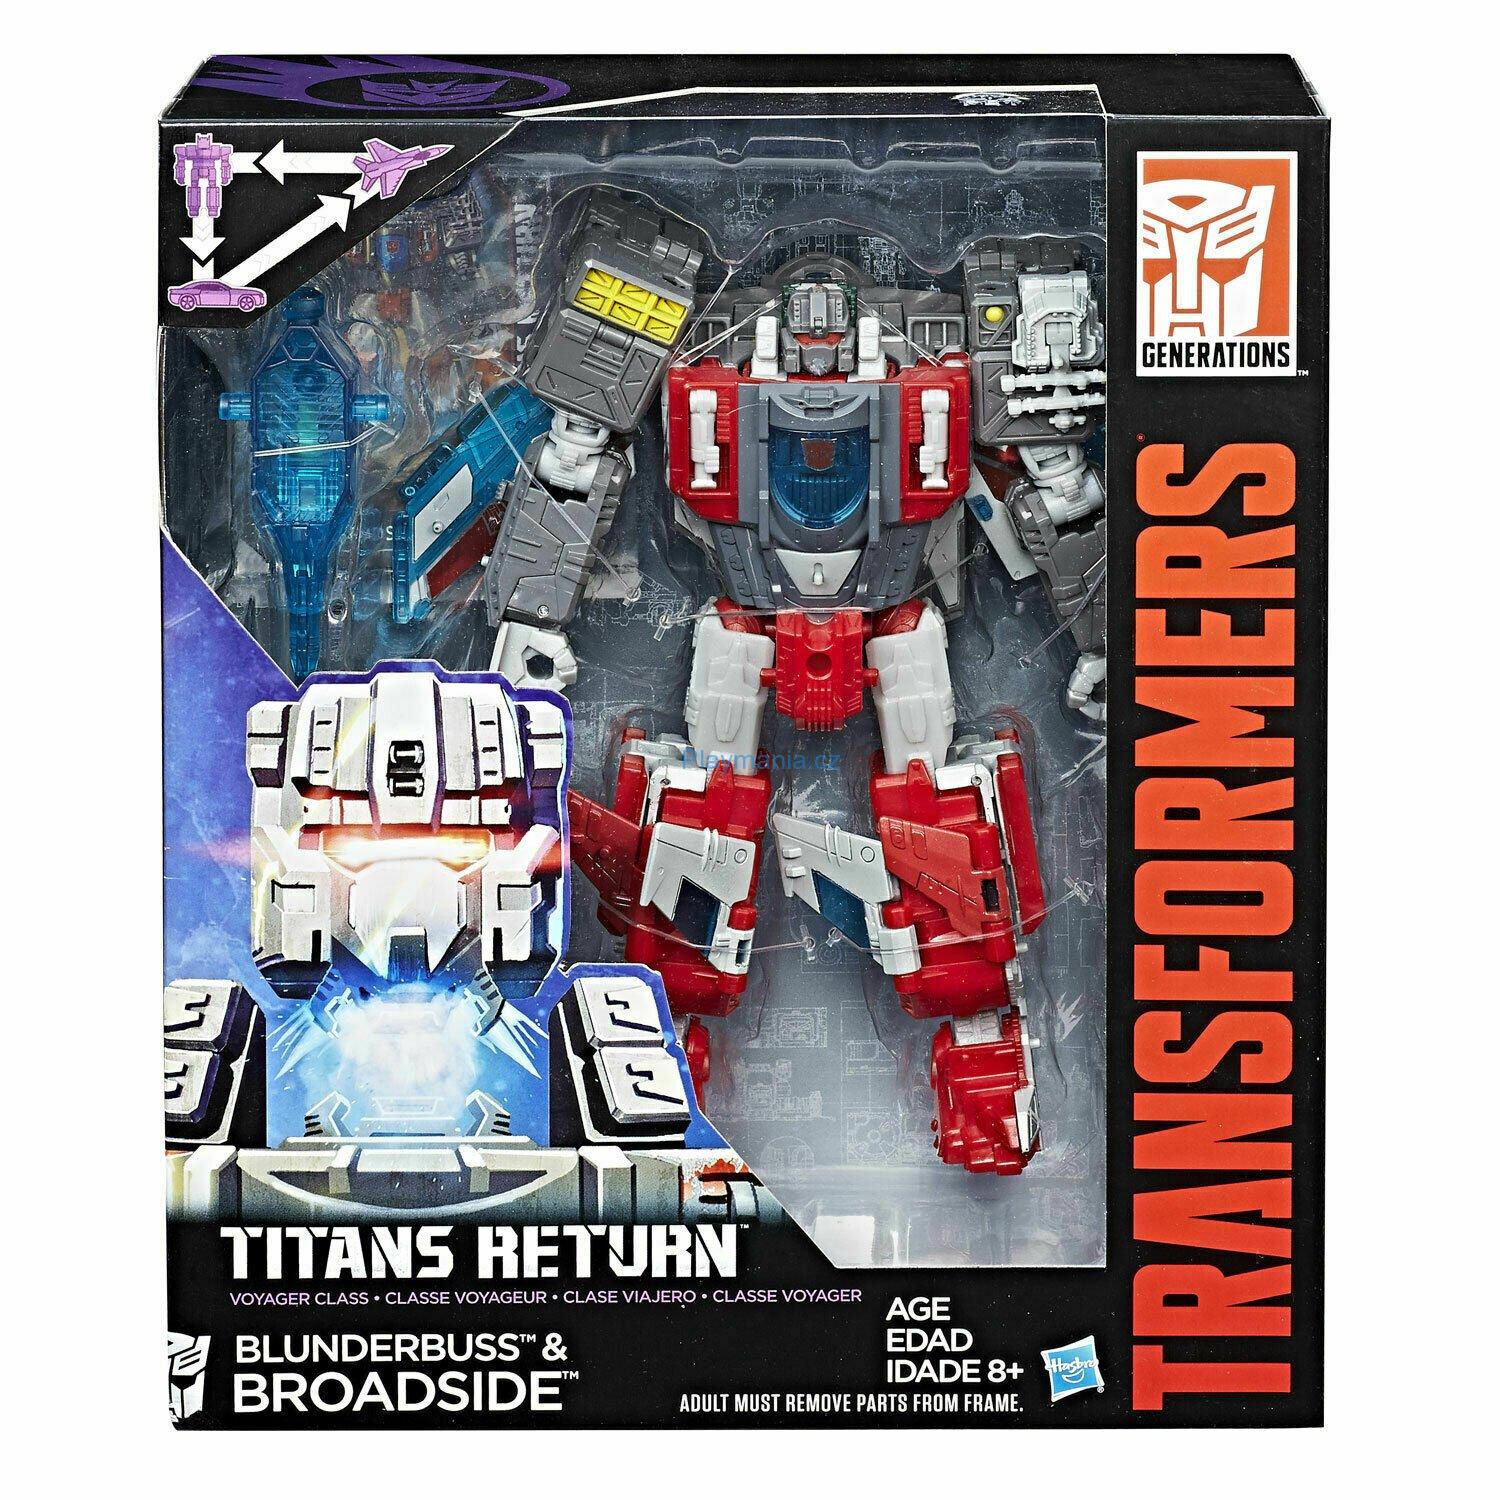 TRANSFORMERS TITANS RETURN VOYAGER CLASS BROADSIDE WITH BLUNDERBUSS